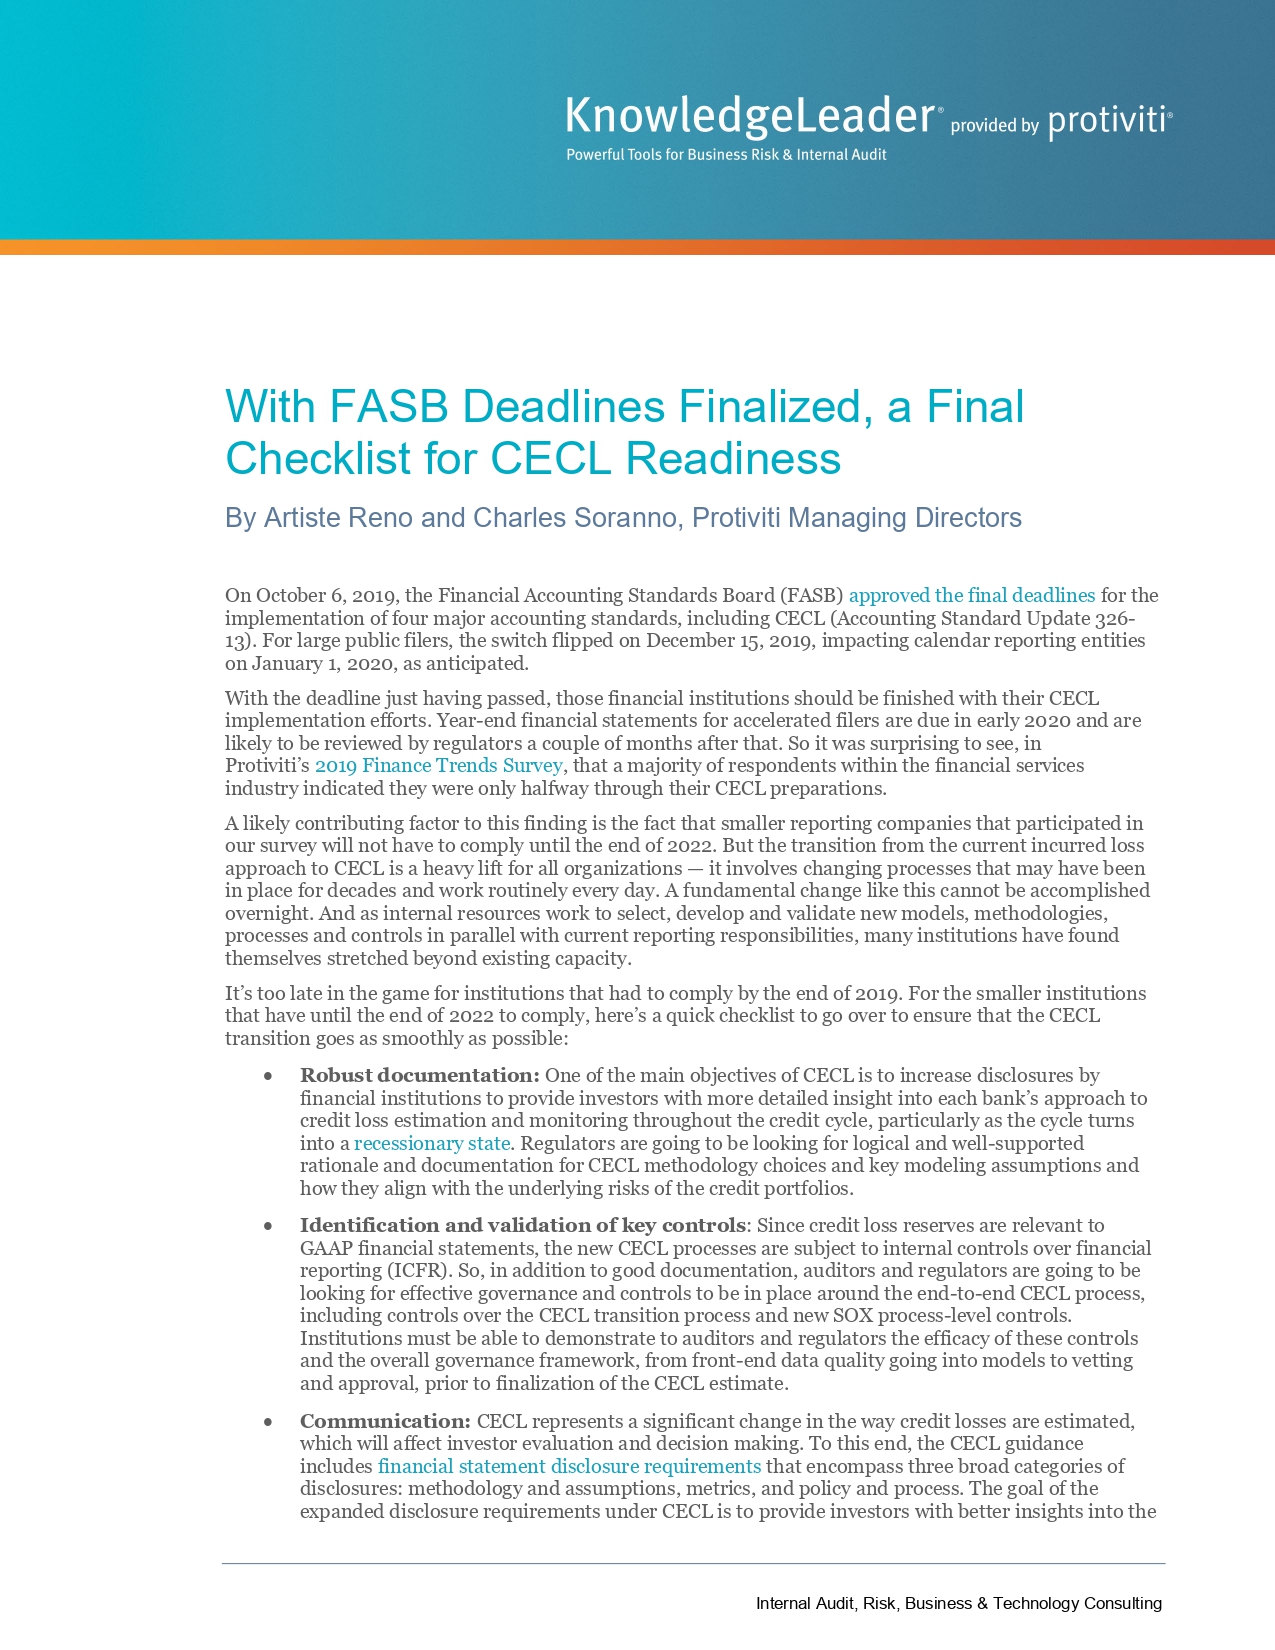 With FASB Deadlines Finalized, a Final Checklist for CECL Readiness